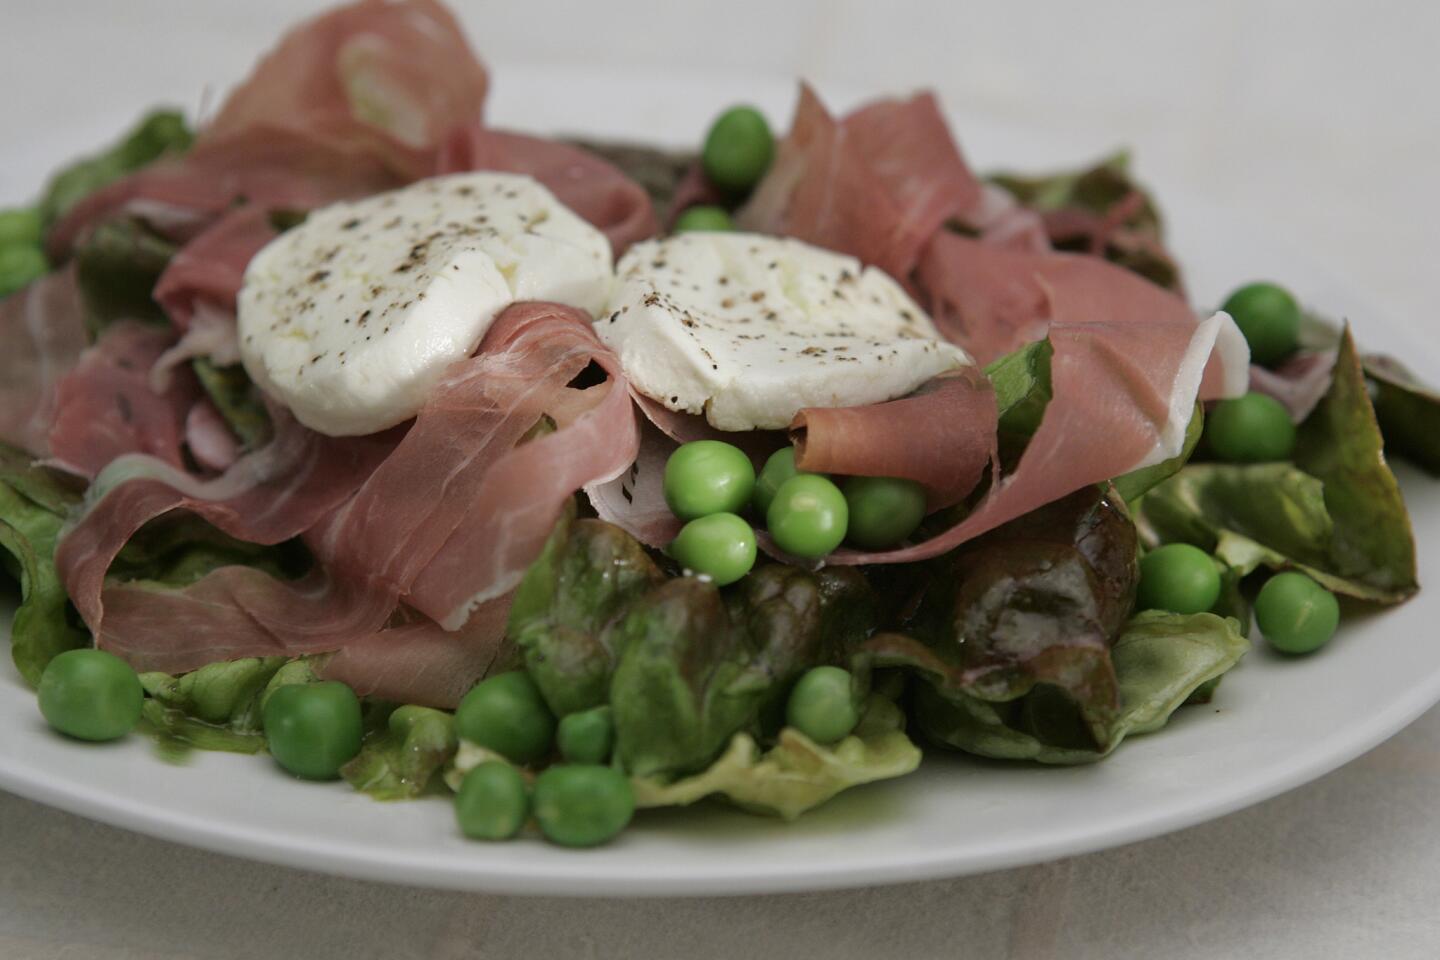 English peas, prosciutto and goat cheese